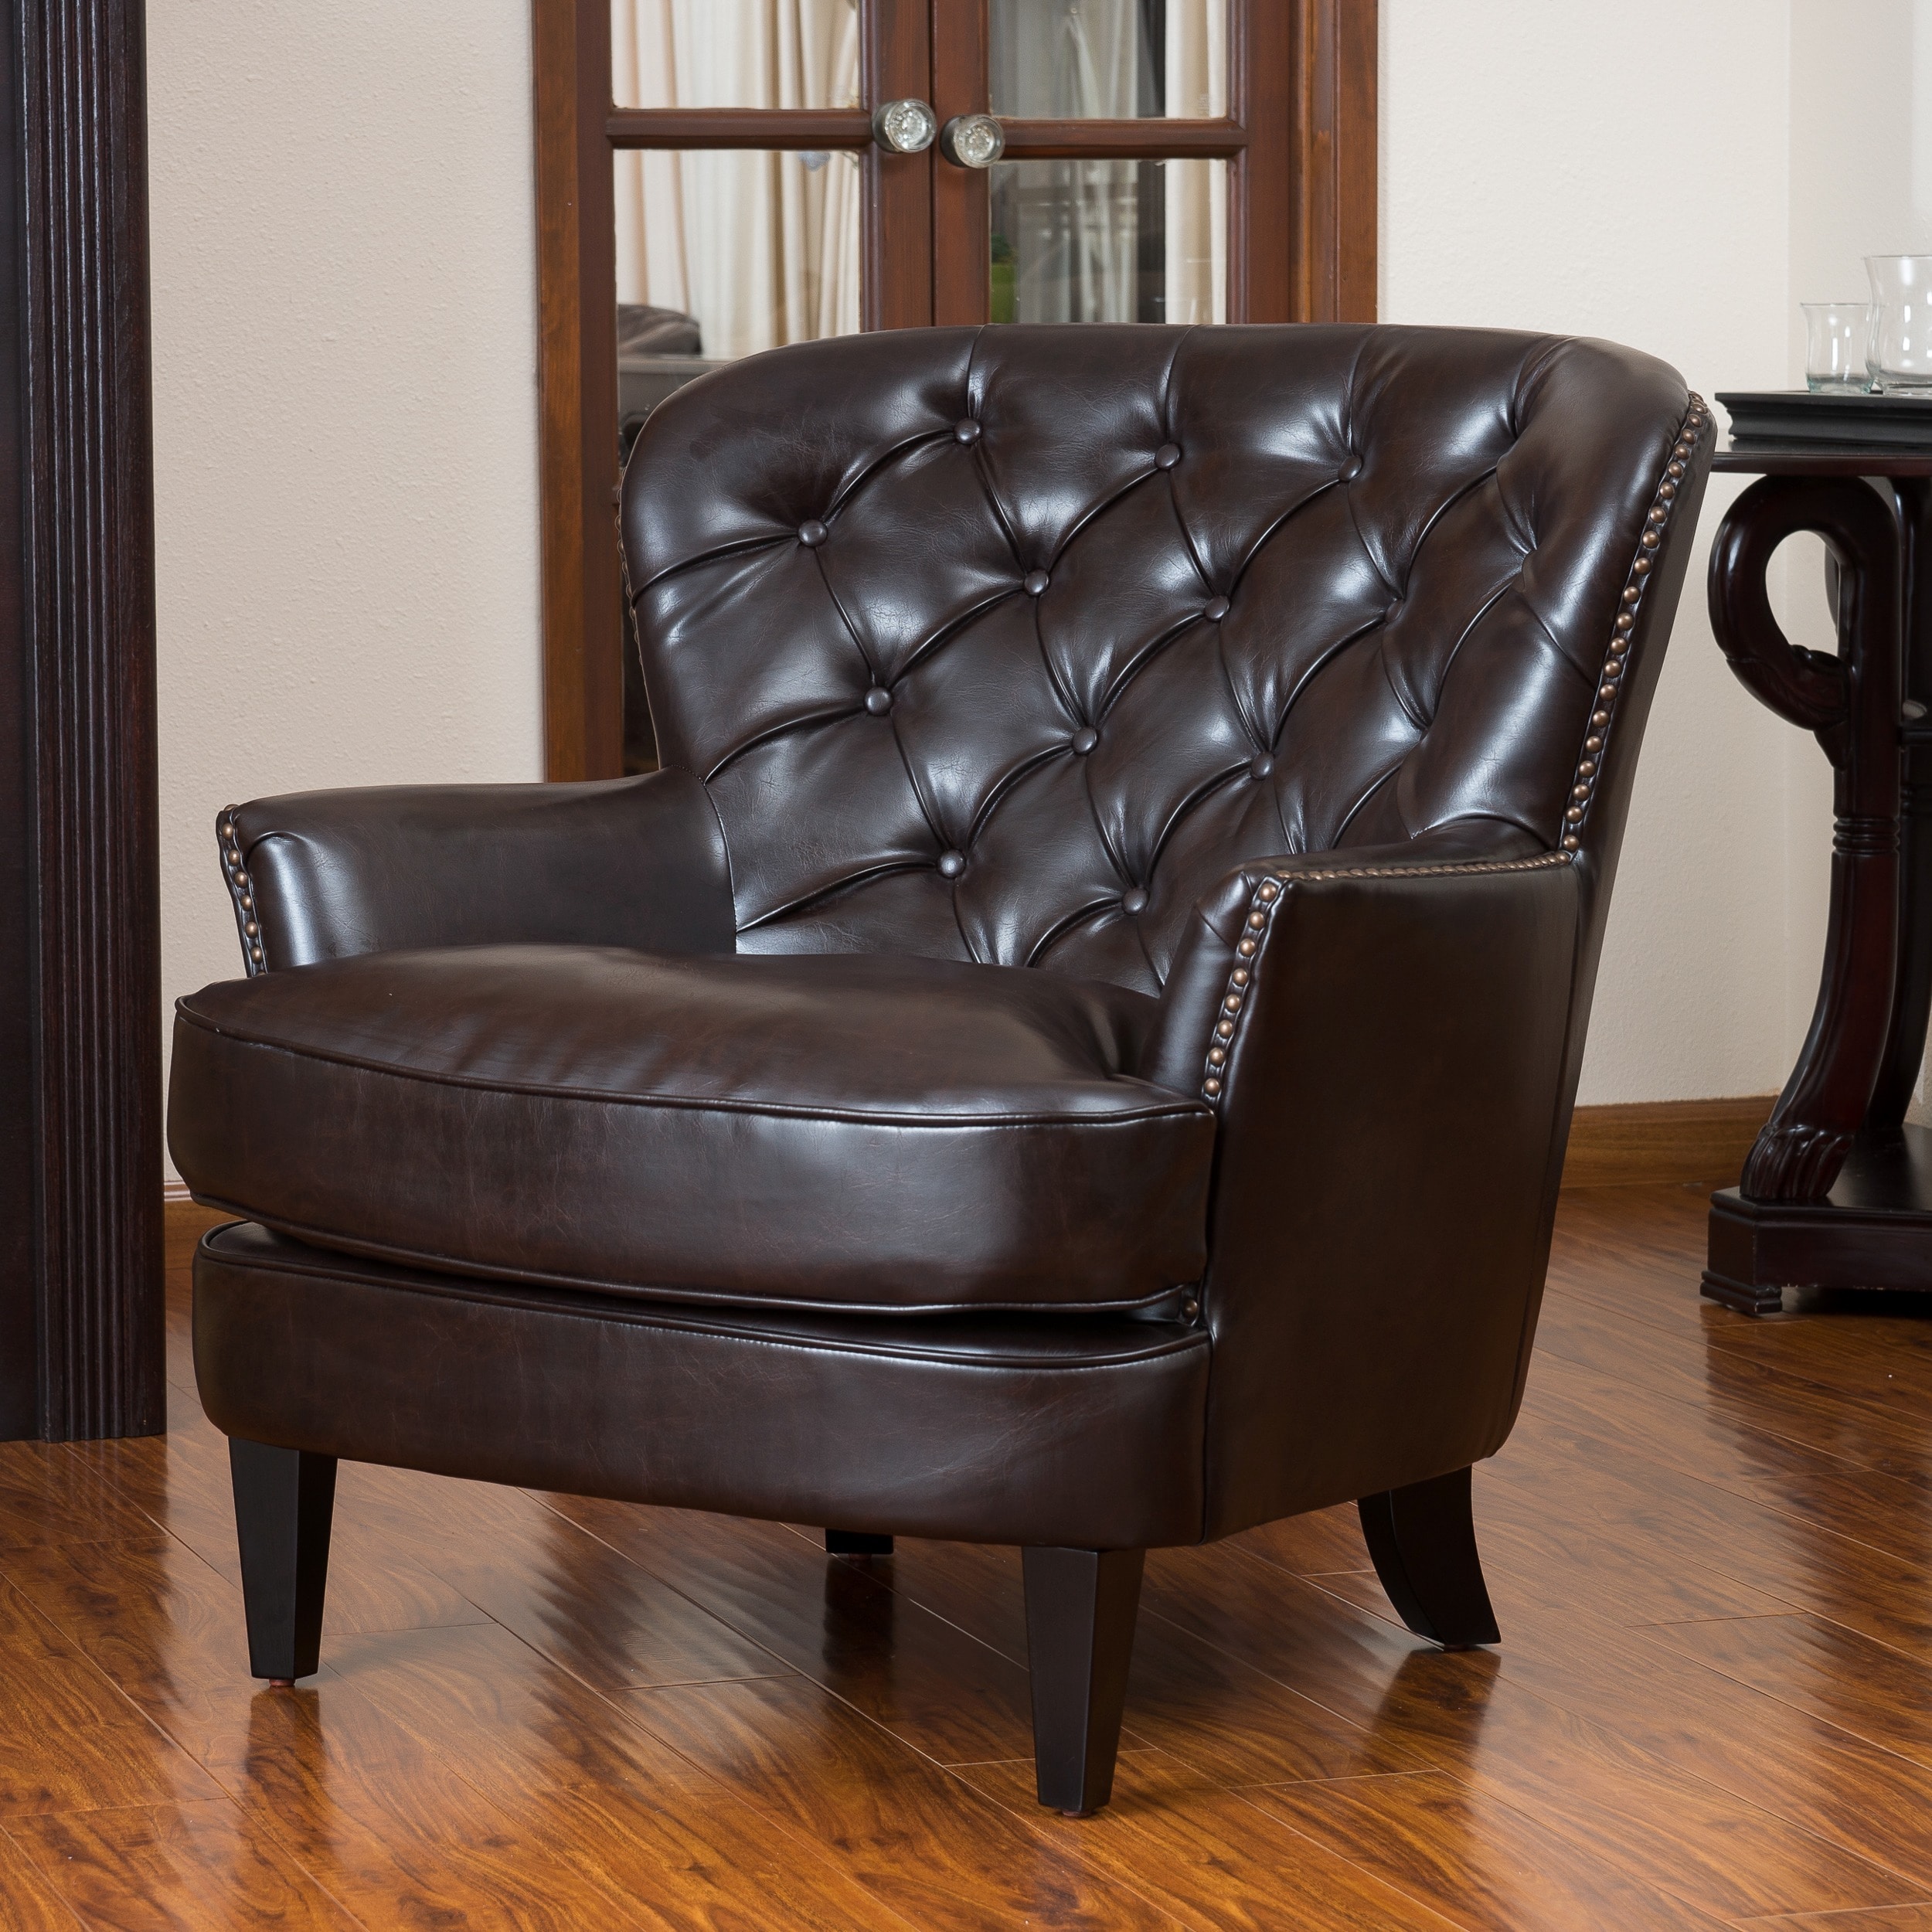 Christopher Knight Home Tafton Tufted Brown Leather Club